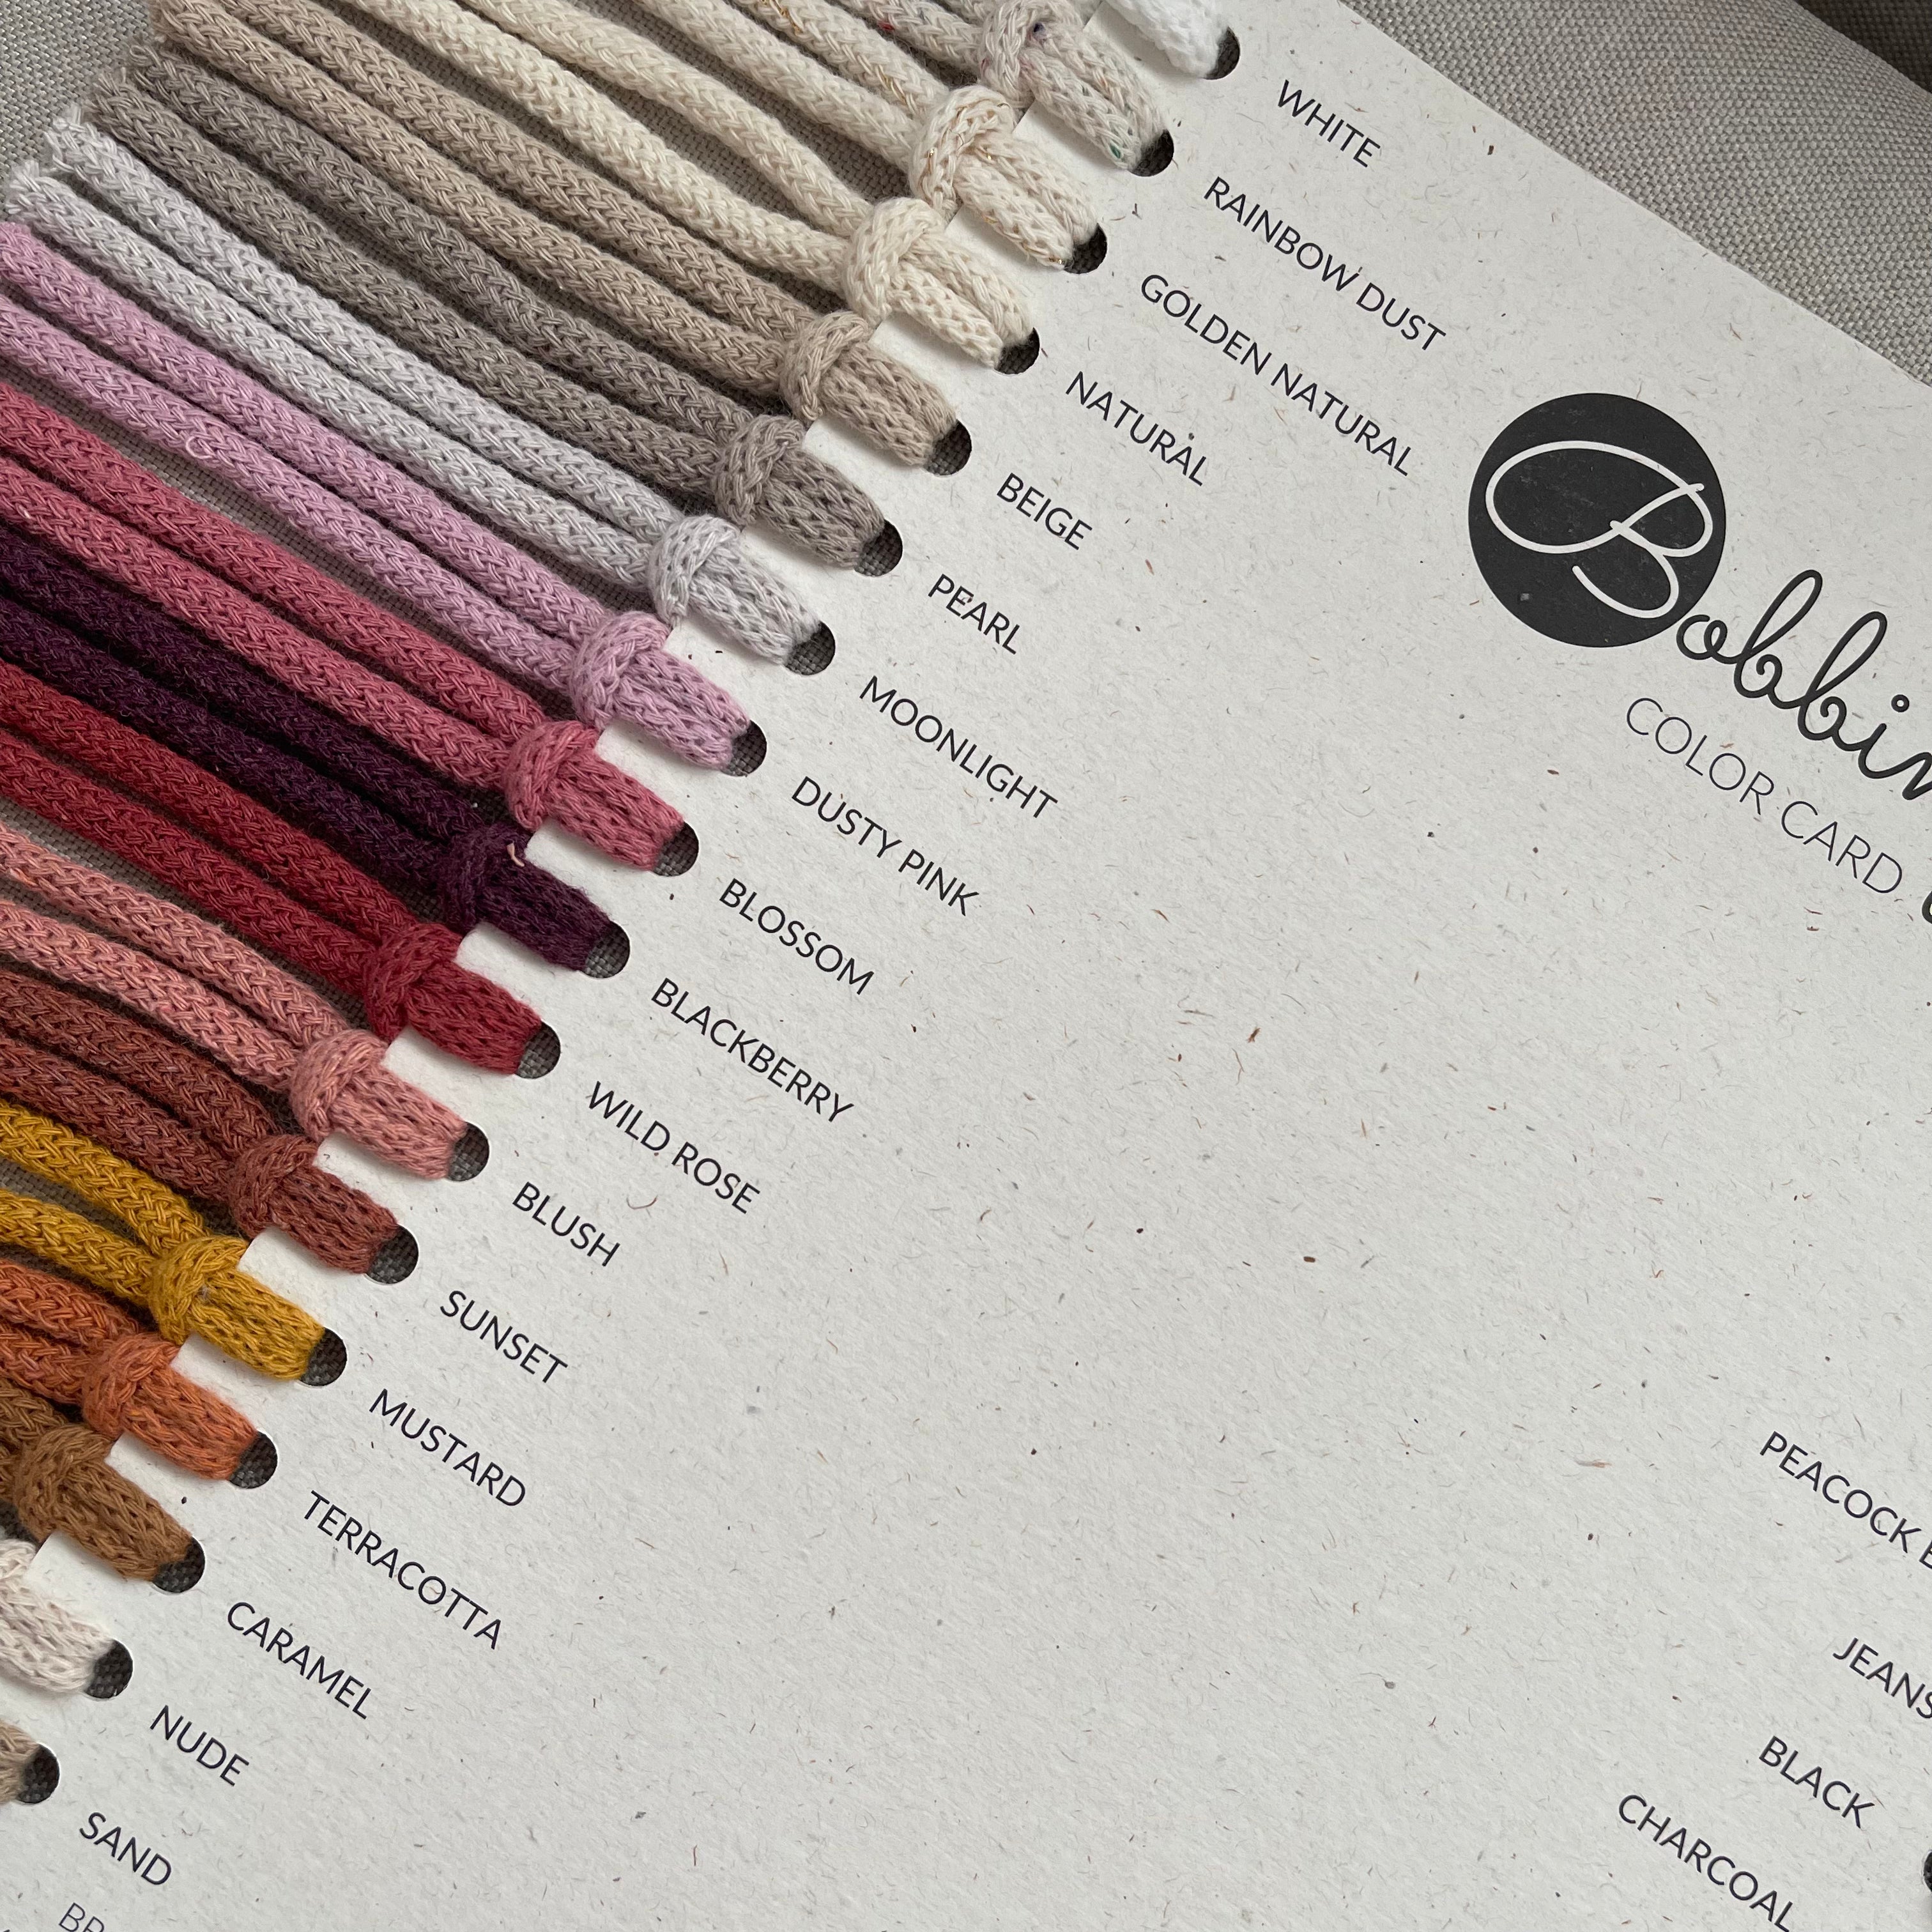 Bobbiny colour swatch sample card – Adelaide Hills Yarn Co.